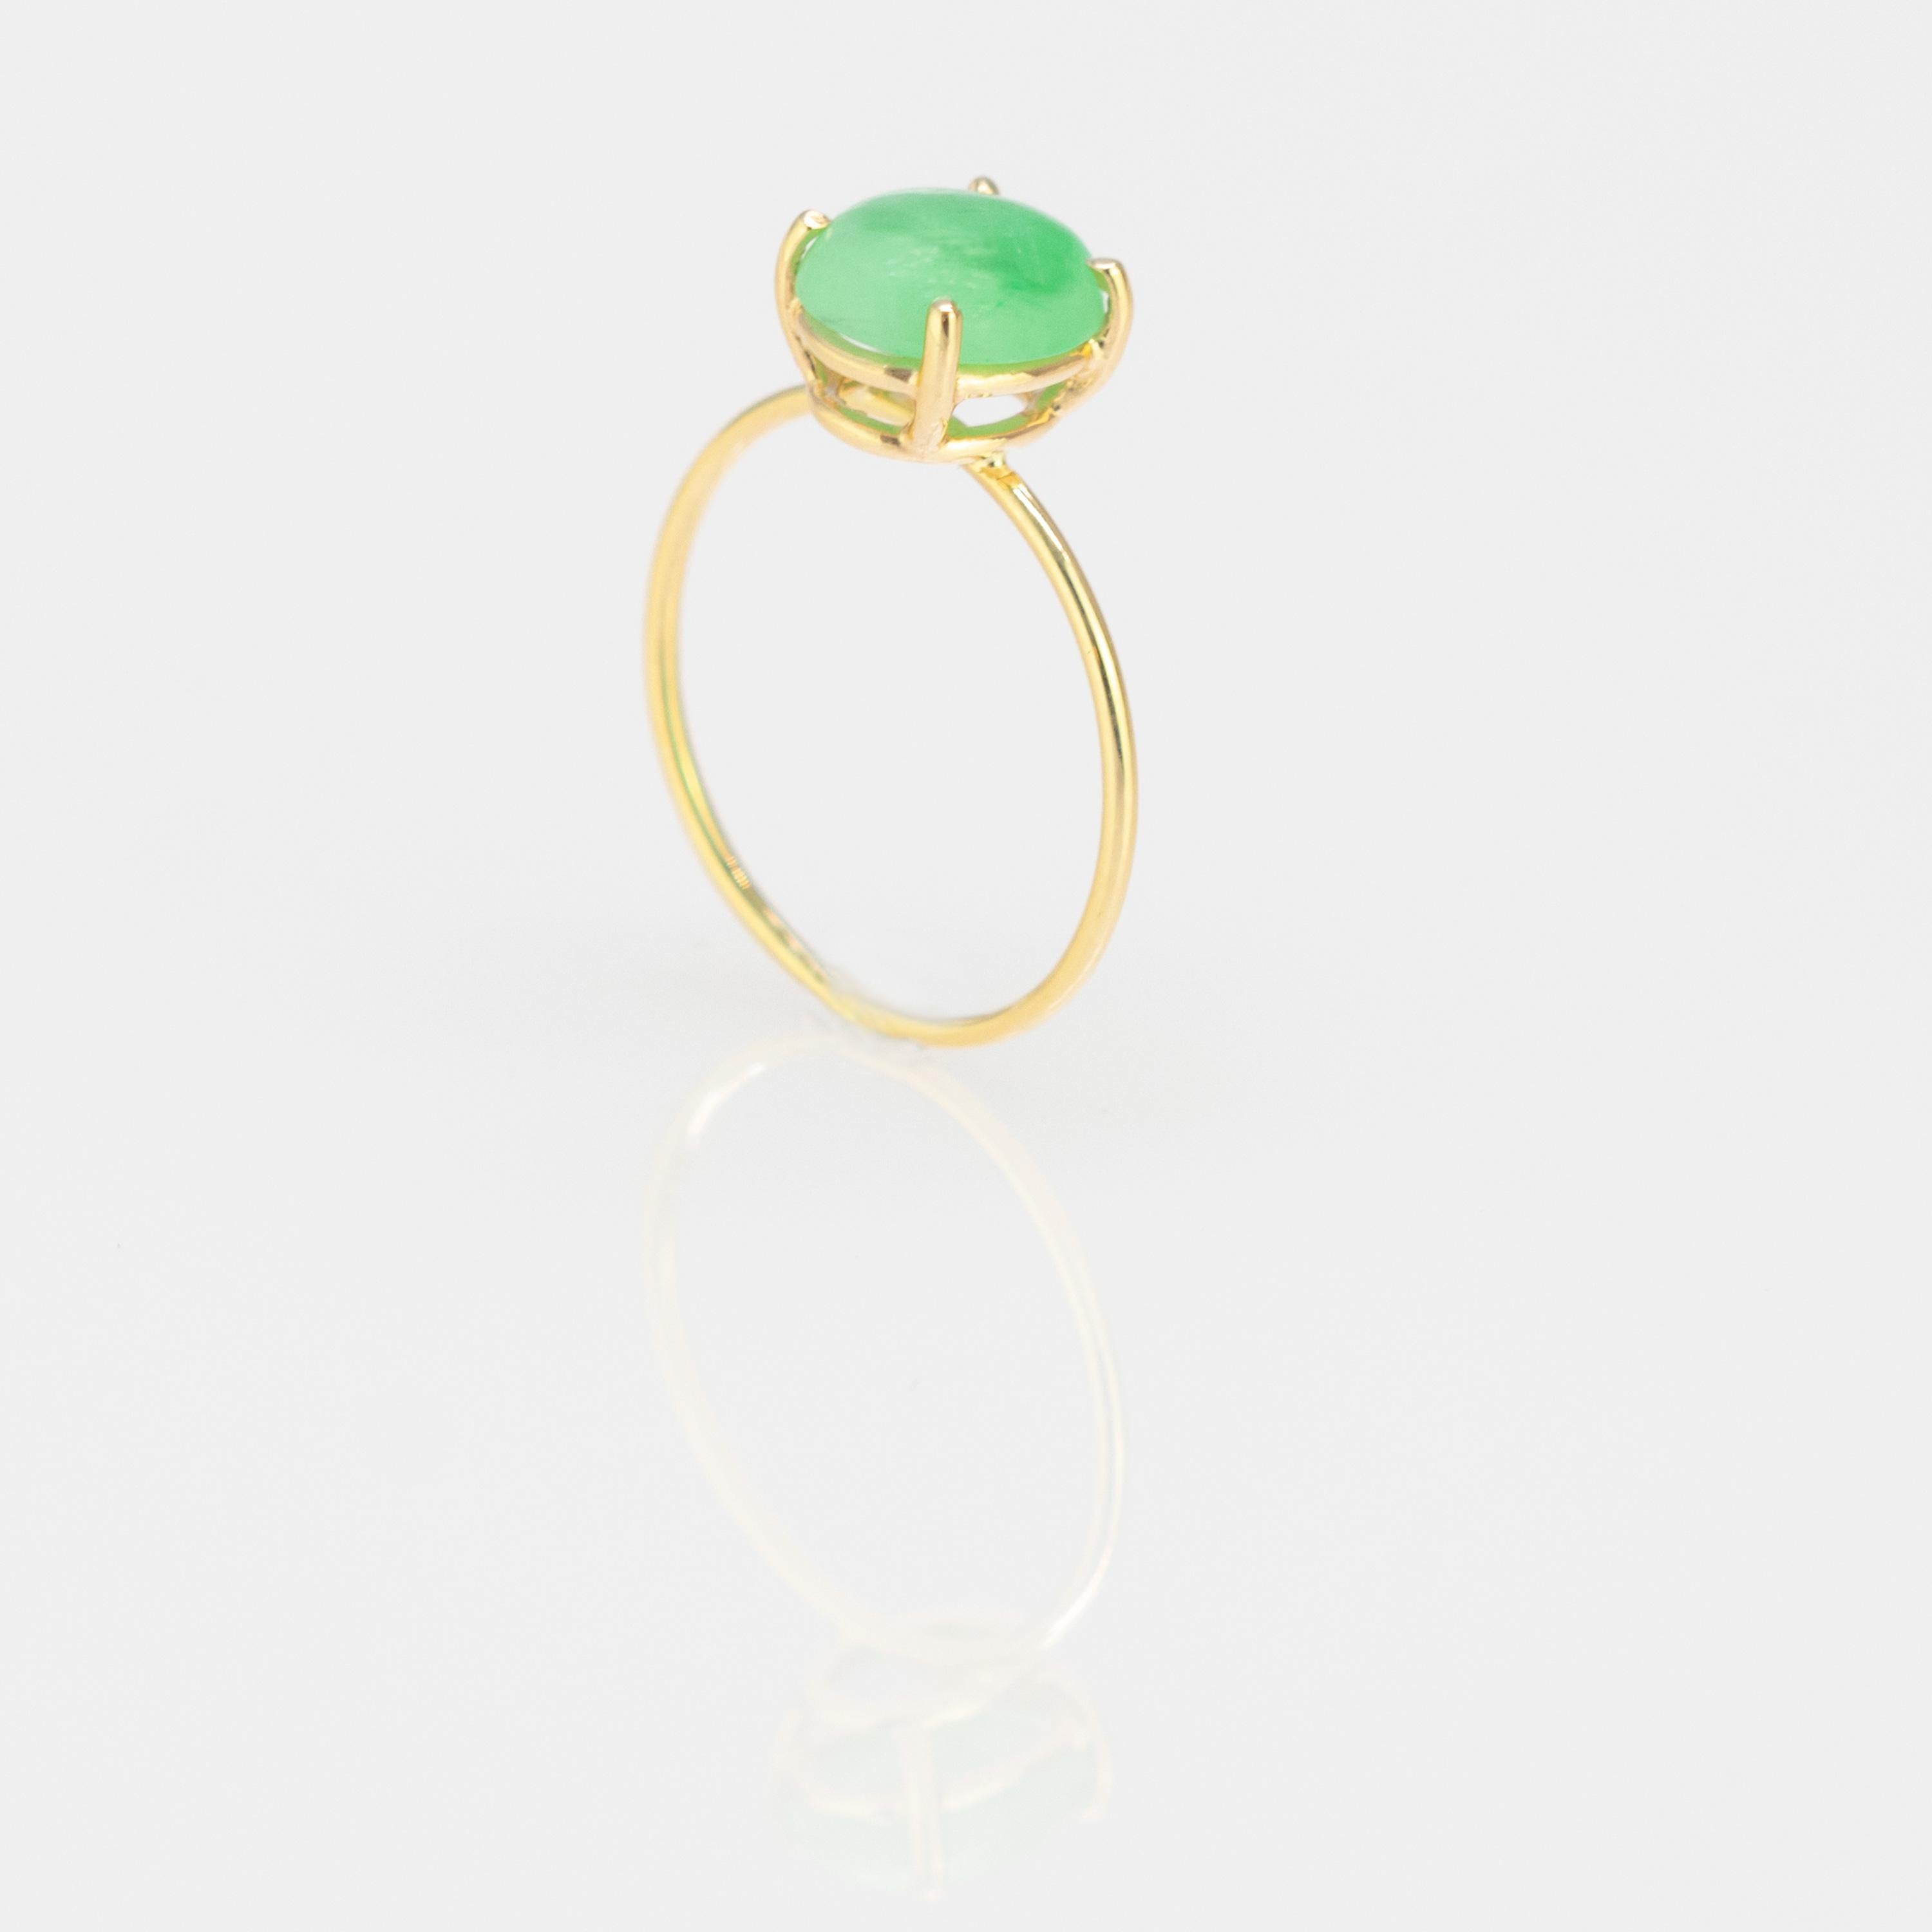 Oval Cut Intini Jewels 1.2 Carat Jade 18 Karat Yellow Gold Solitaire Cocktail Oval Ring For Sale